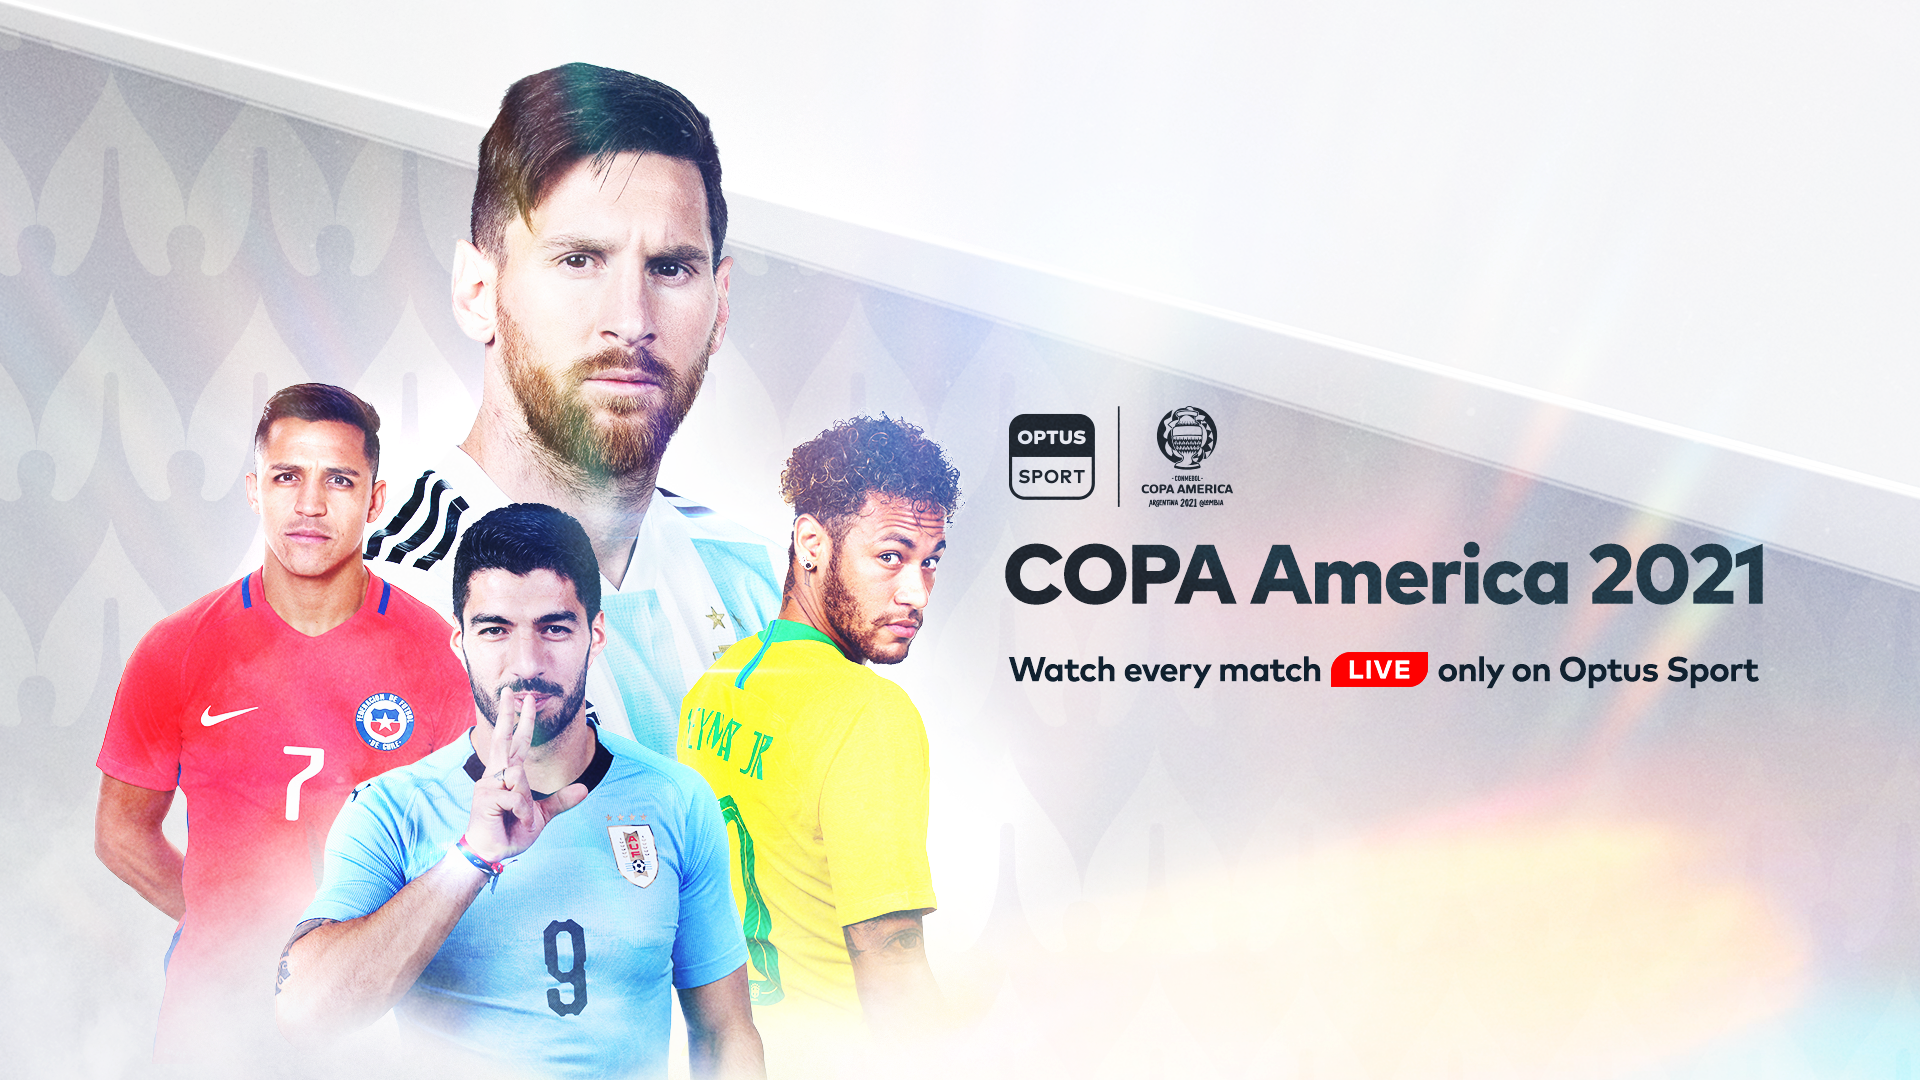 Optus Sport secures rights to Copa América 2021 and 2024 tournaments